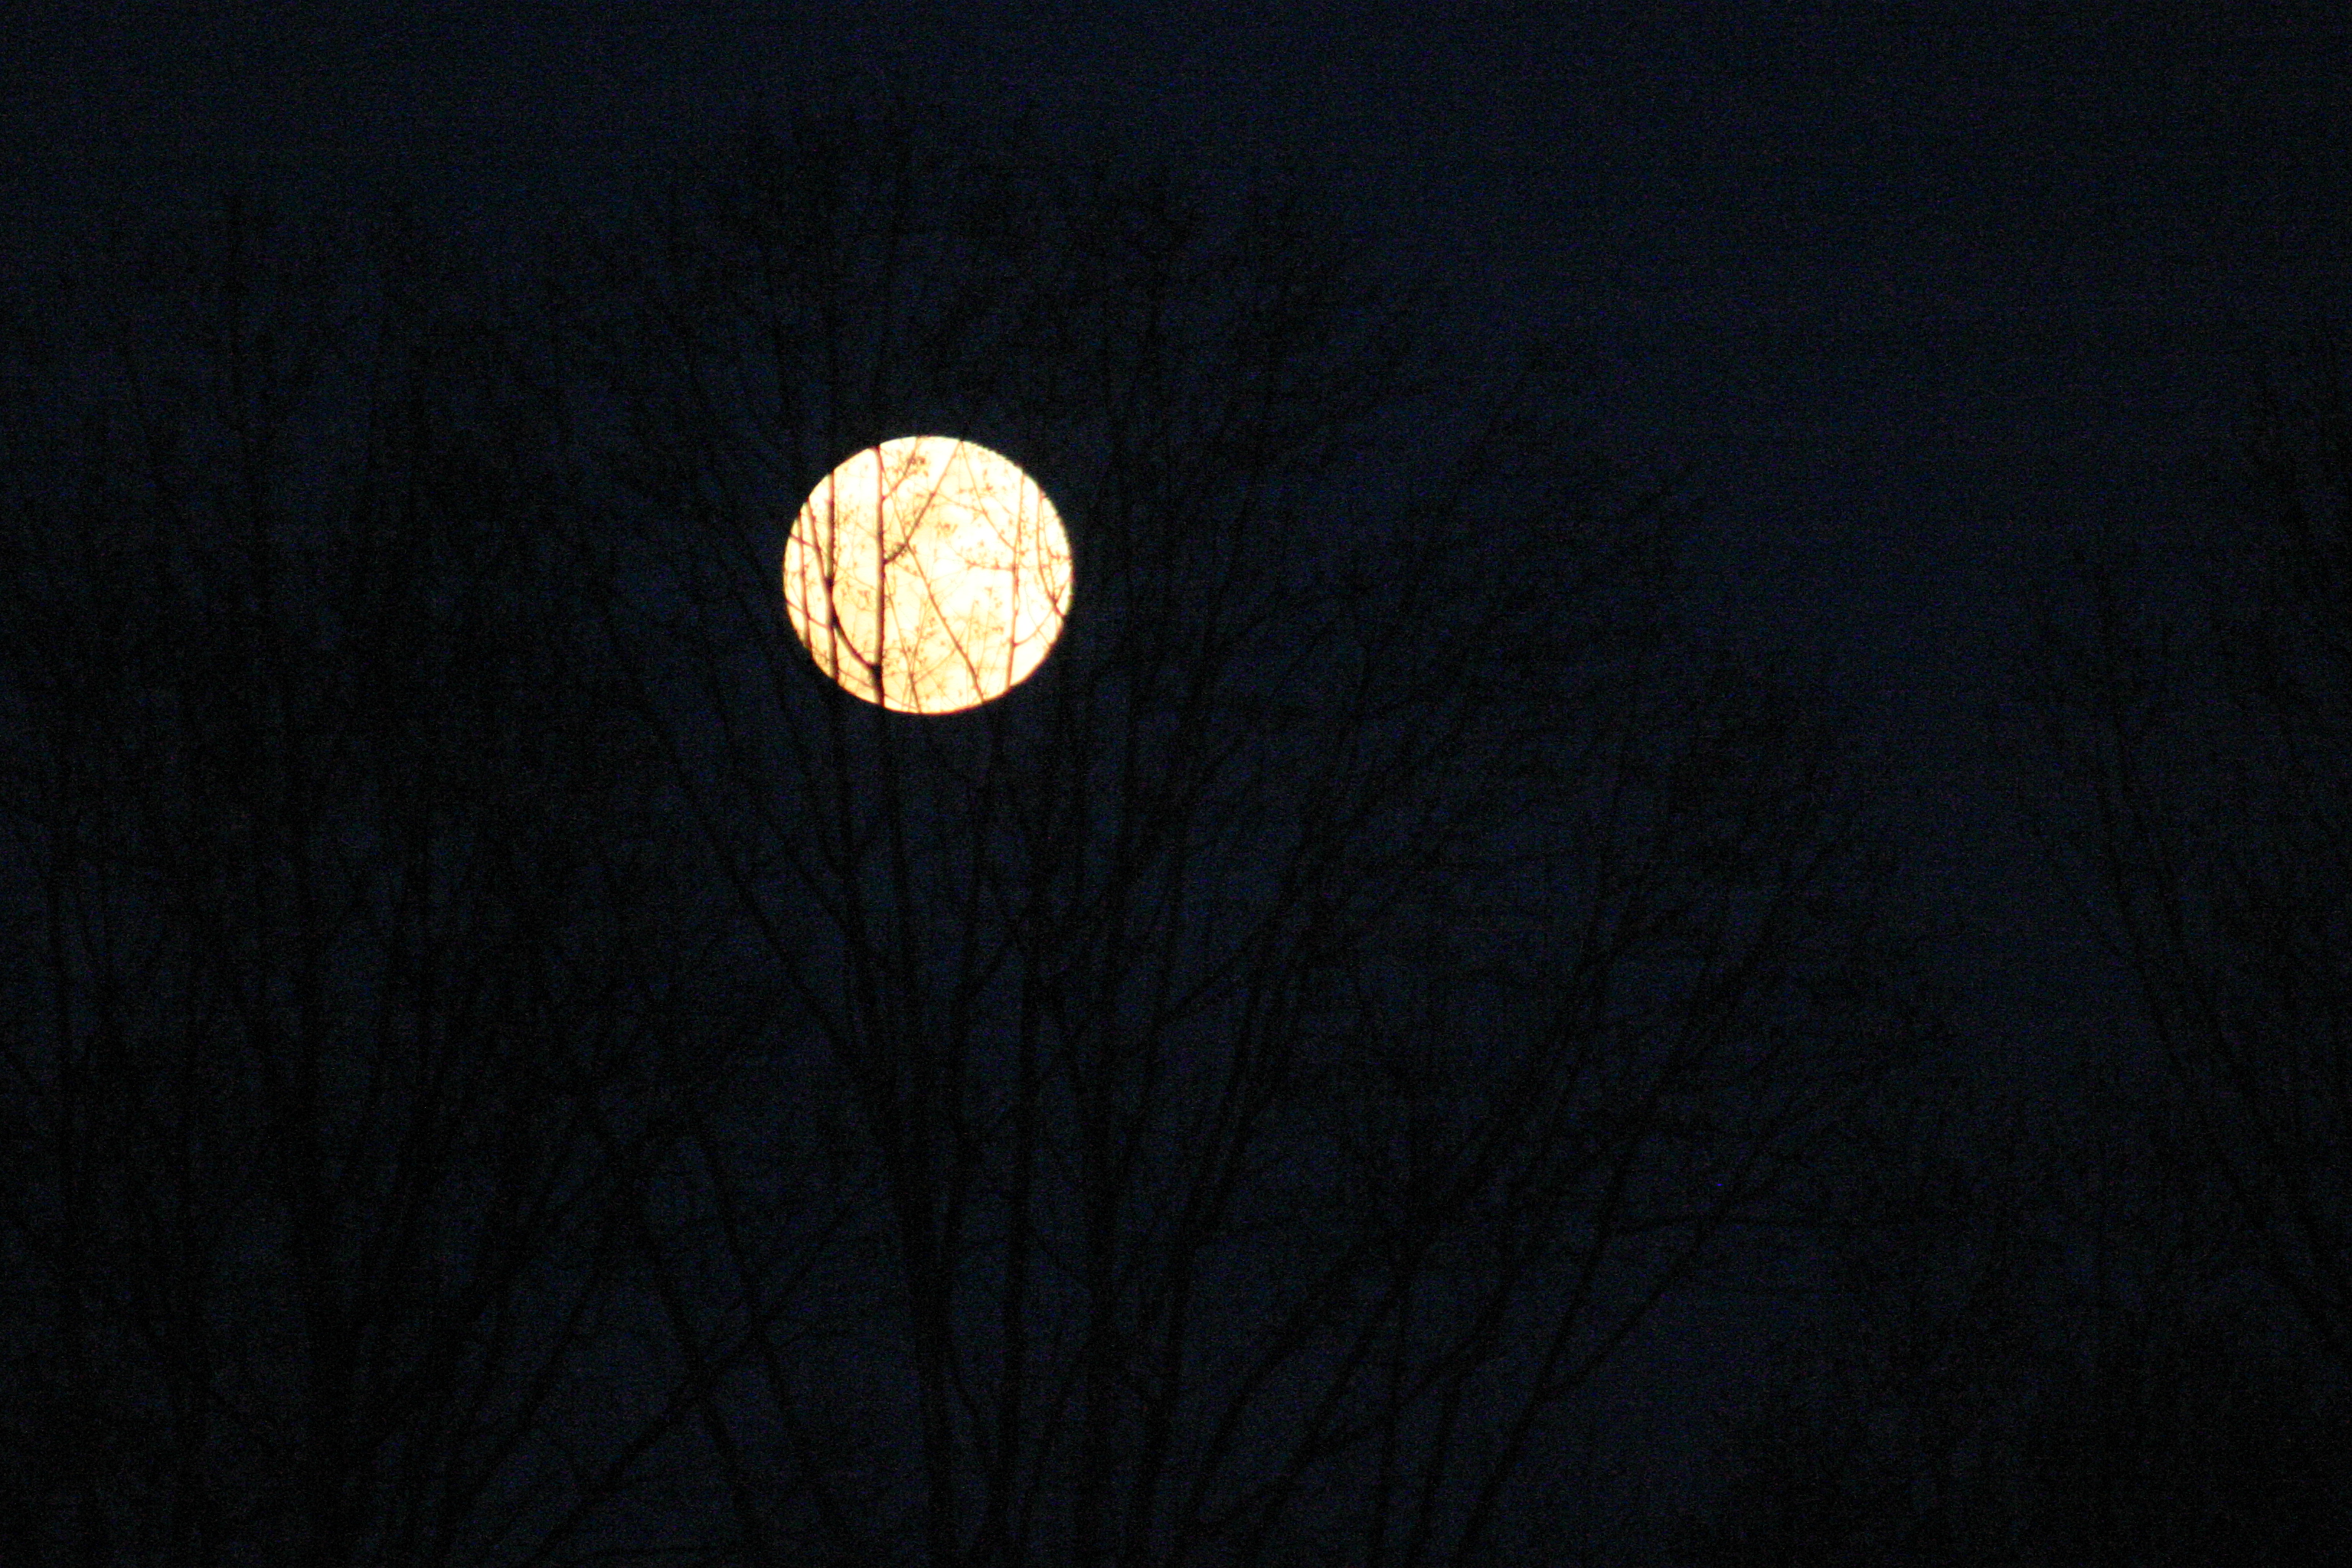 My photo: March 29, 2010 ‘March Moon Rising’ – Good Enough for Halloween 2018